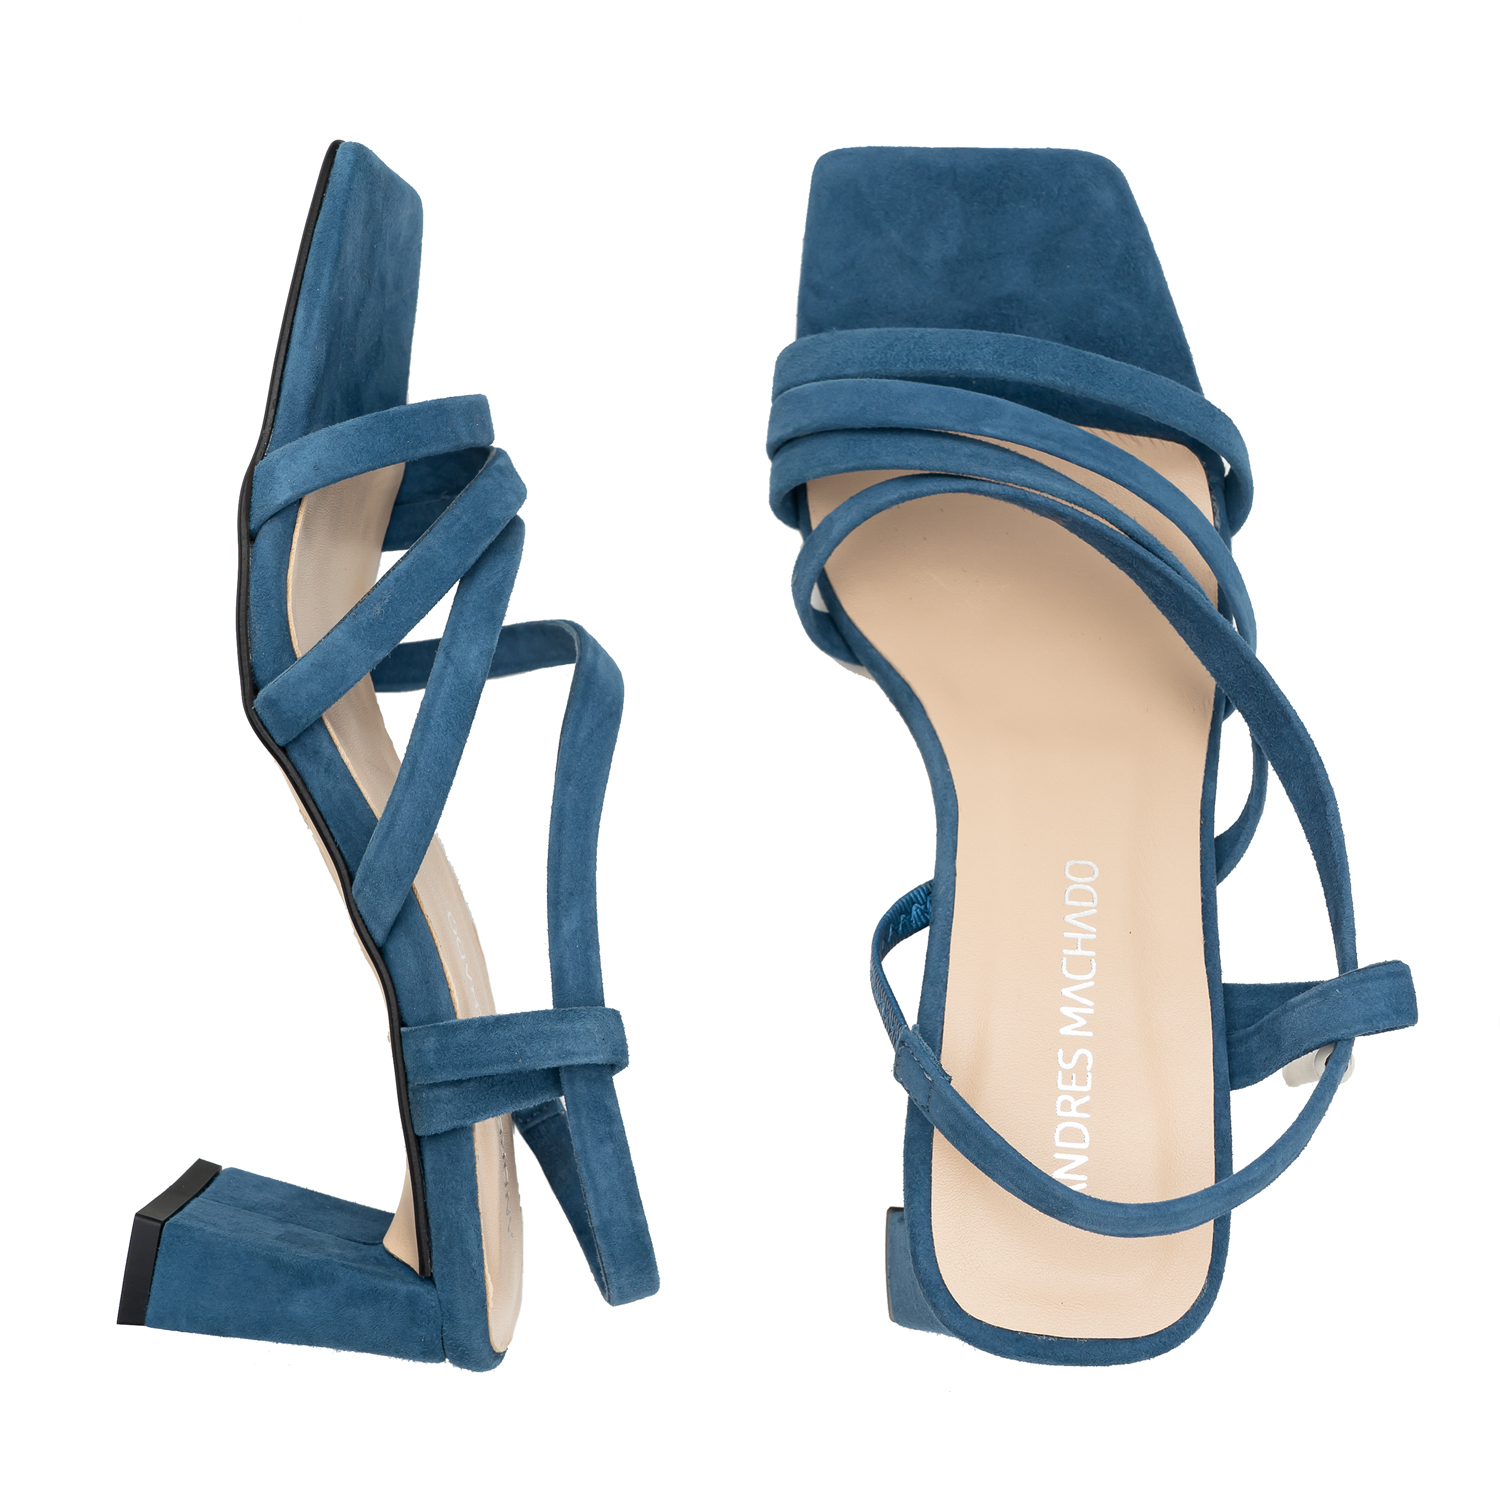 Strapped Sandals in Blue Split Leather and Square Toe 